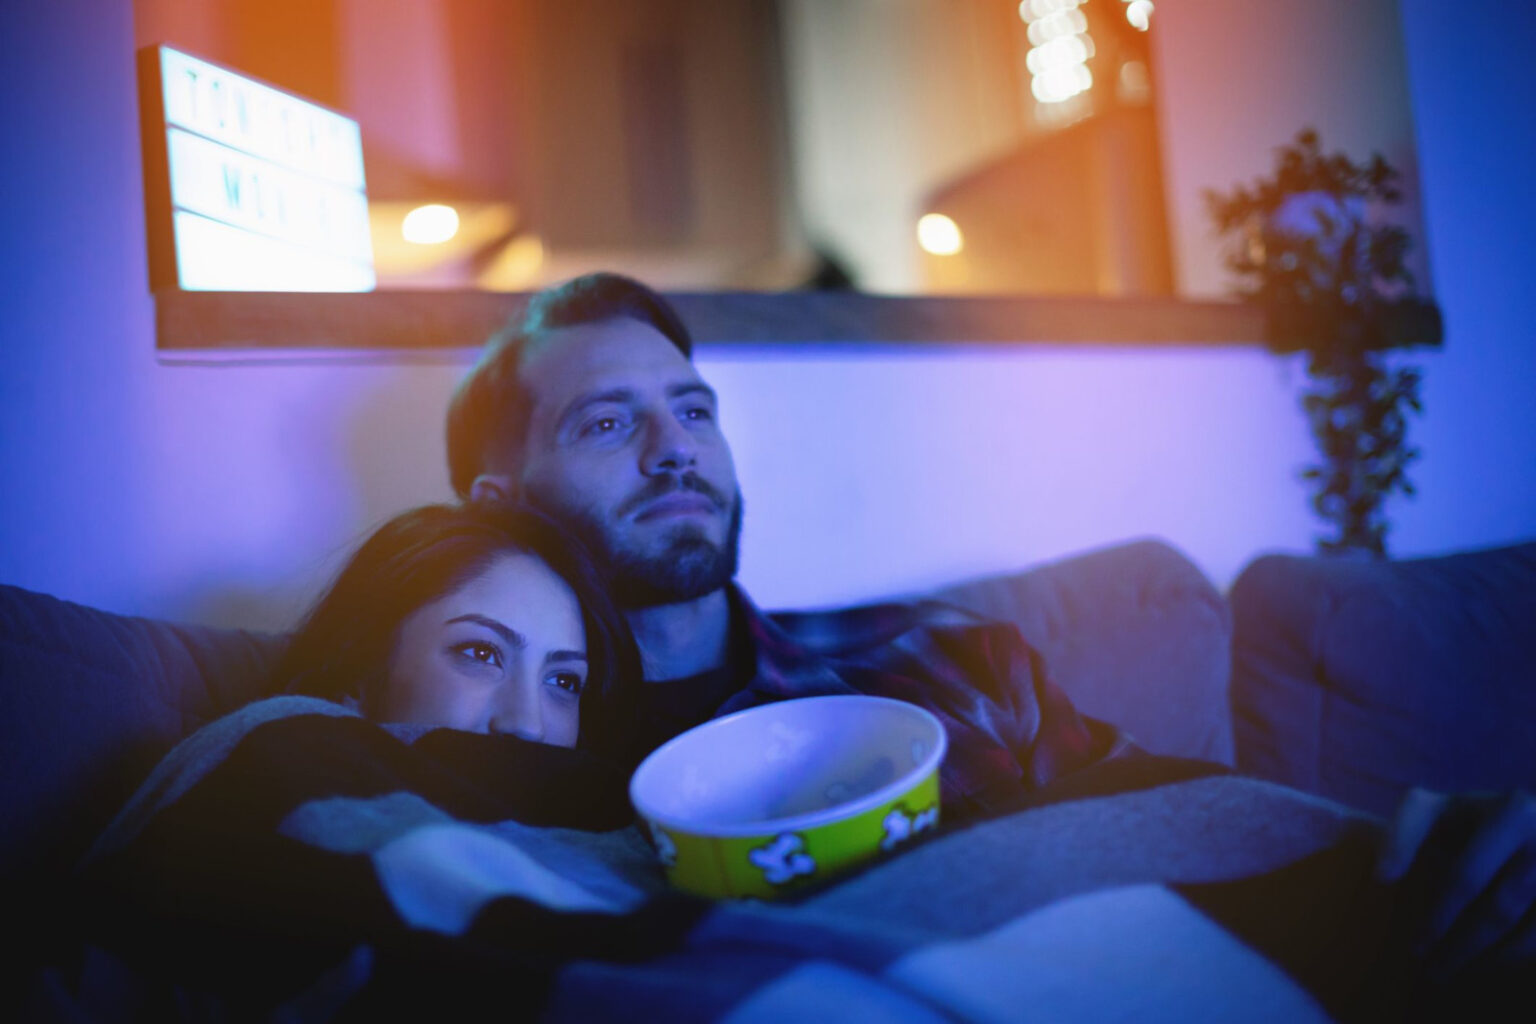 Is tonight date night? Plan a spectacular, unforgettable movie night with someone special! Check out these tips to make tonight perfect with ease!